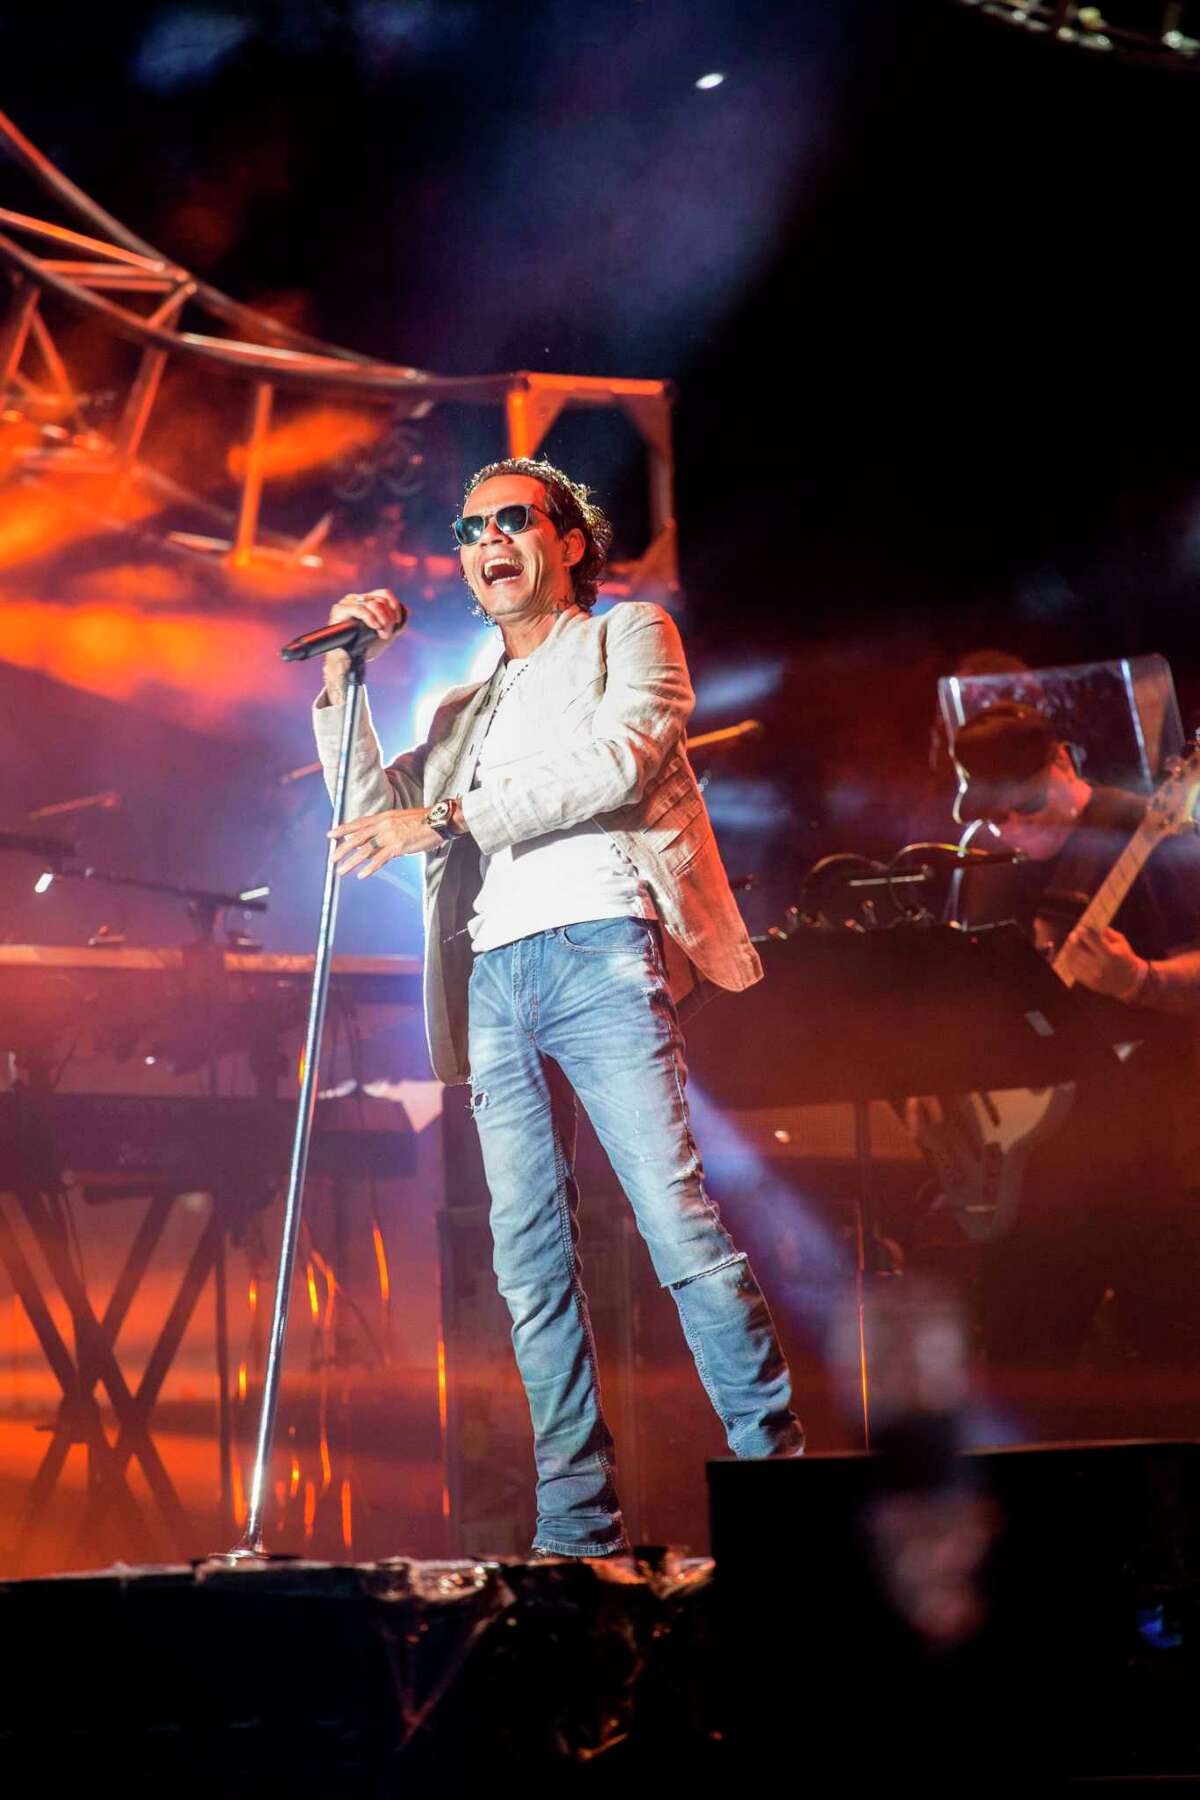 Puerto Rican singer Marc Anthony performs during the Festival "Presidente" at the Estadio Olimpico in Santo Domingo, Dominican Republic, on 03 November 2017. / AFP PHOTO / Erika SANTELICESERIKA SANTELICES/AFP/Getty Images